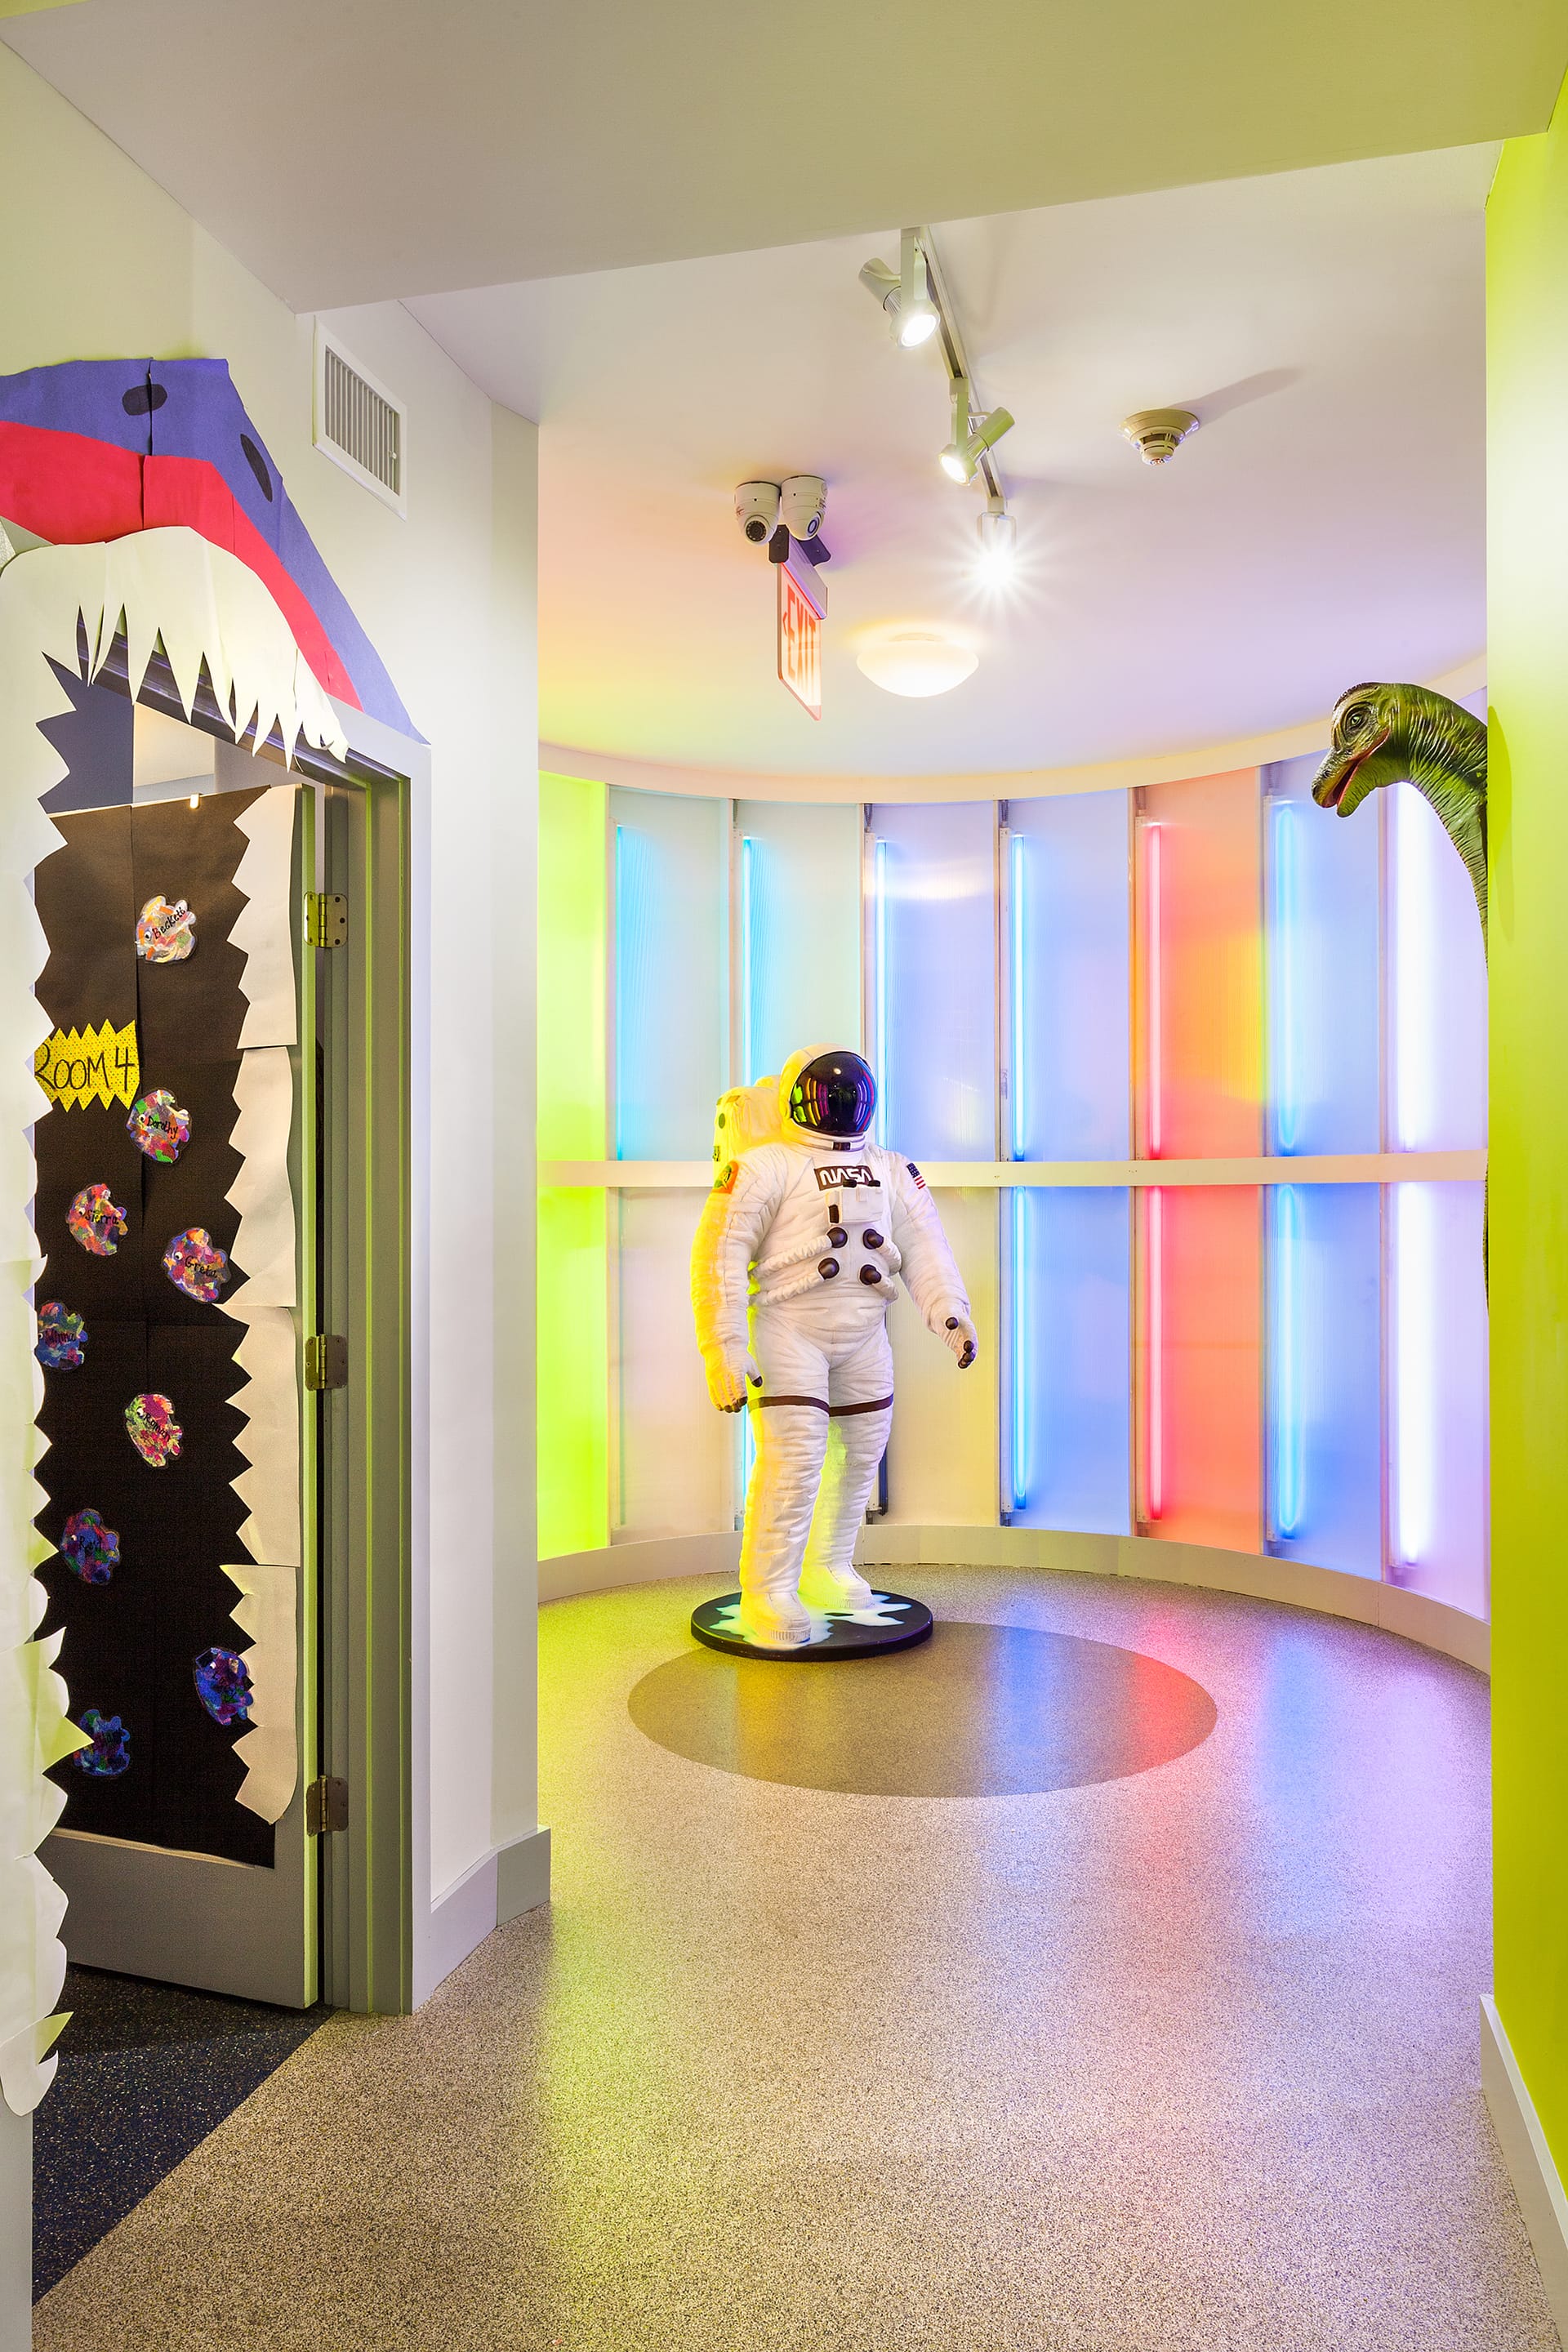 Rotunda with multicolored, paneled lighting and an astronaut suit in the middle